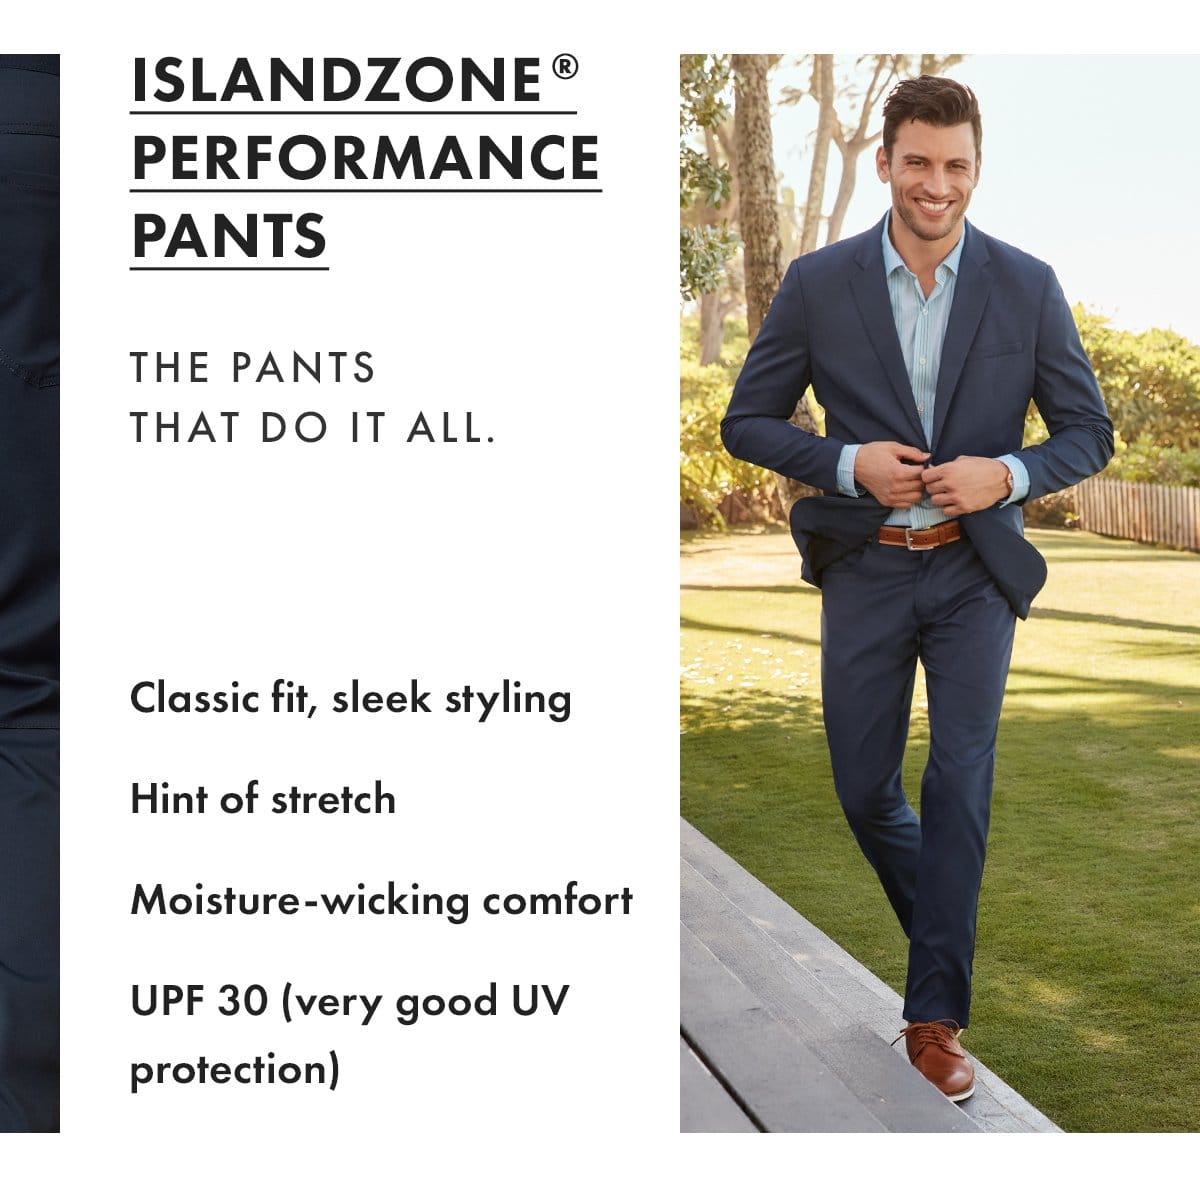 IslandZone Performance Pants. The pants that do it all. Classic fit, sleek styling, hint of stretch, moisture wicking comfort, UPF 30.